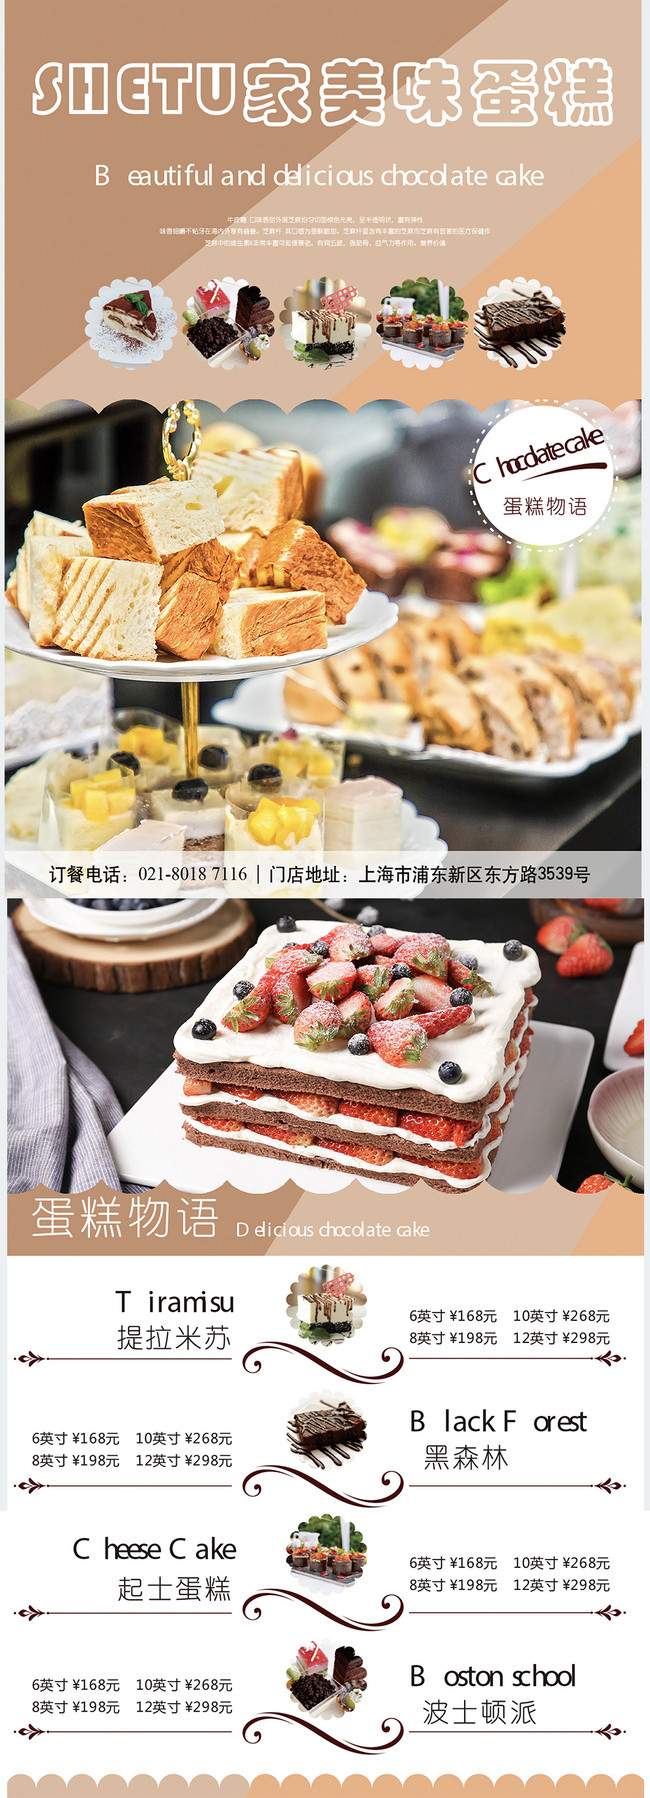 Delicious Cafe and Cake Flyer Free PSD Template by 99flyers on DeviantArt